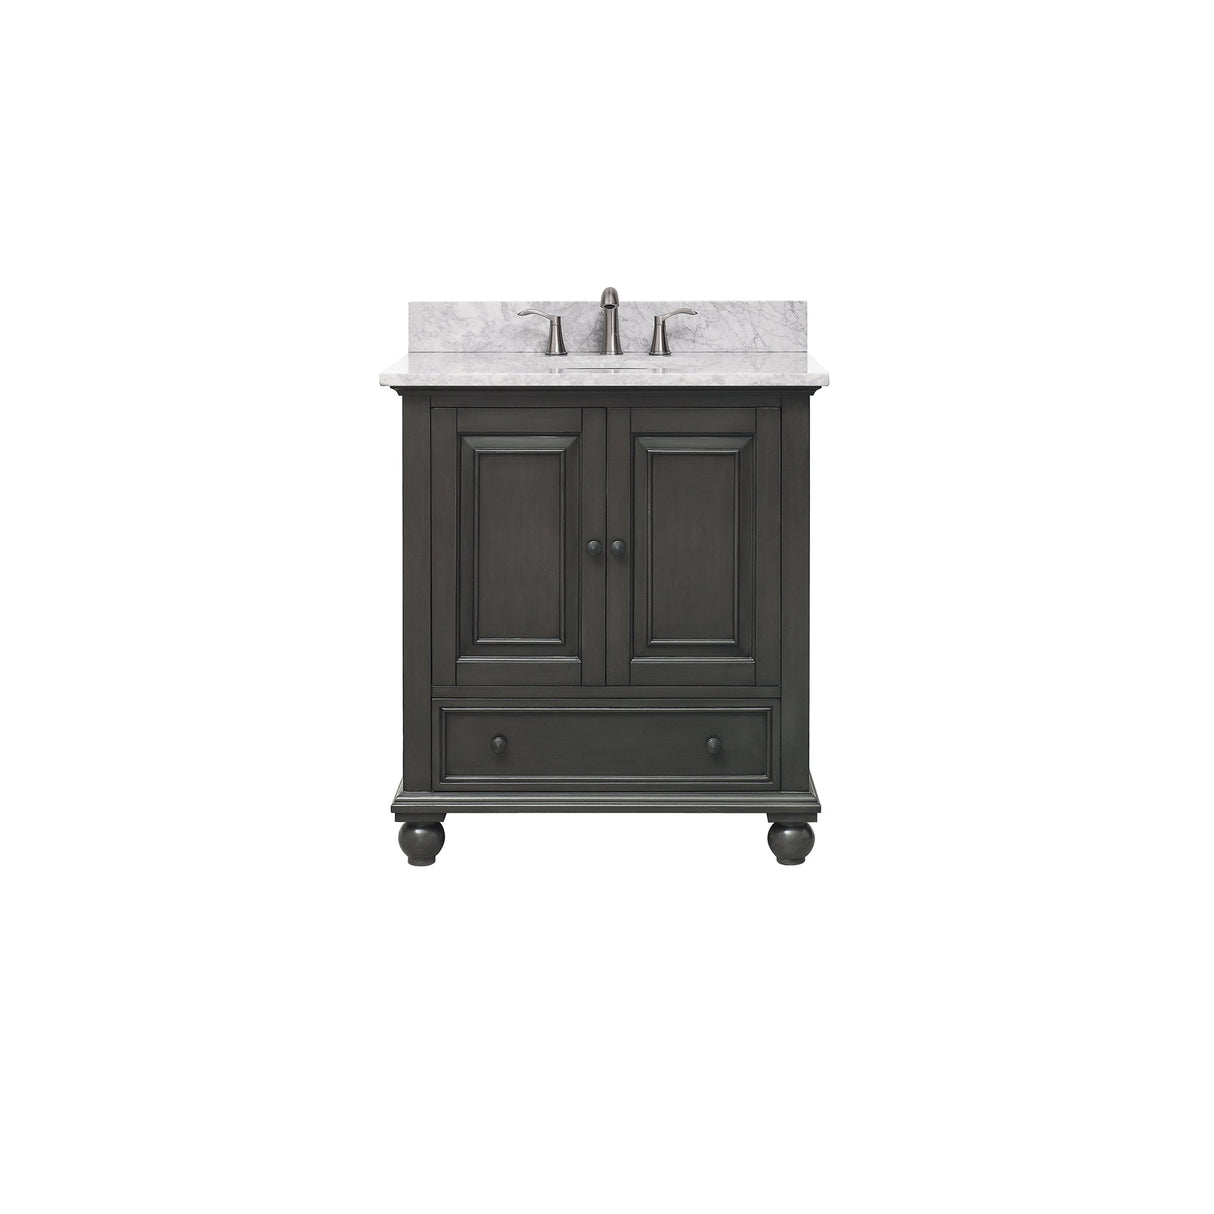 Avanity Thompson 31 in. Vanity in Charcoal Glaze finish with Carrara White Marble Top